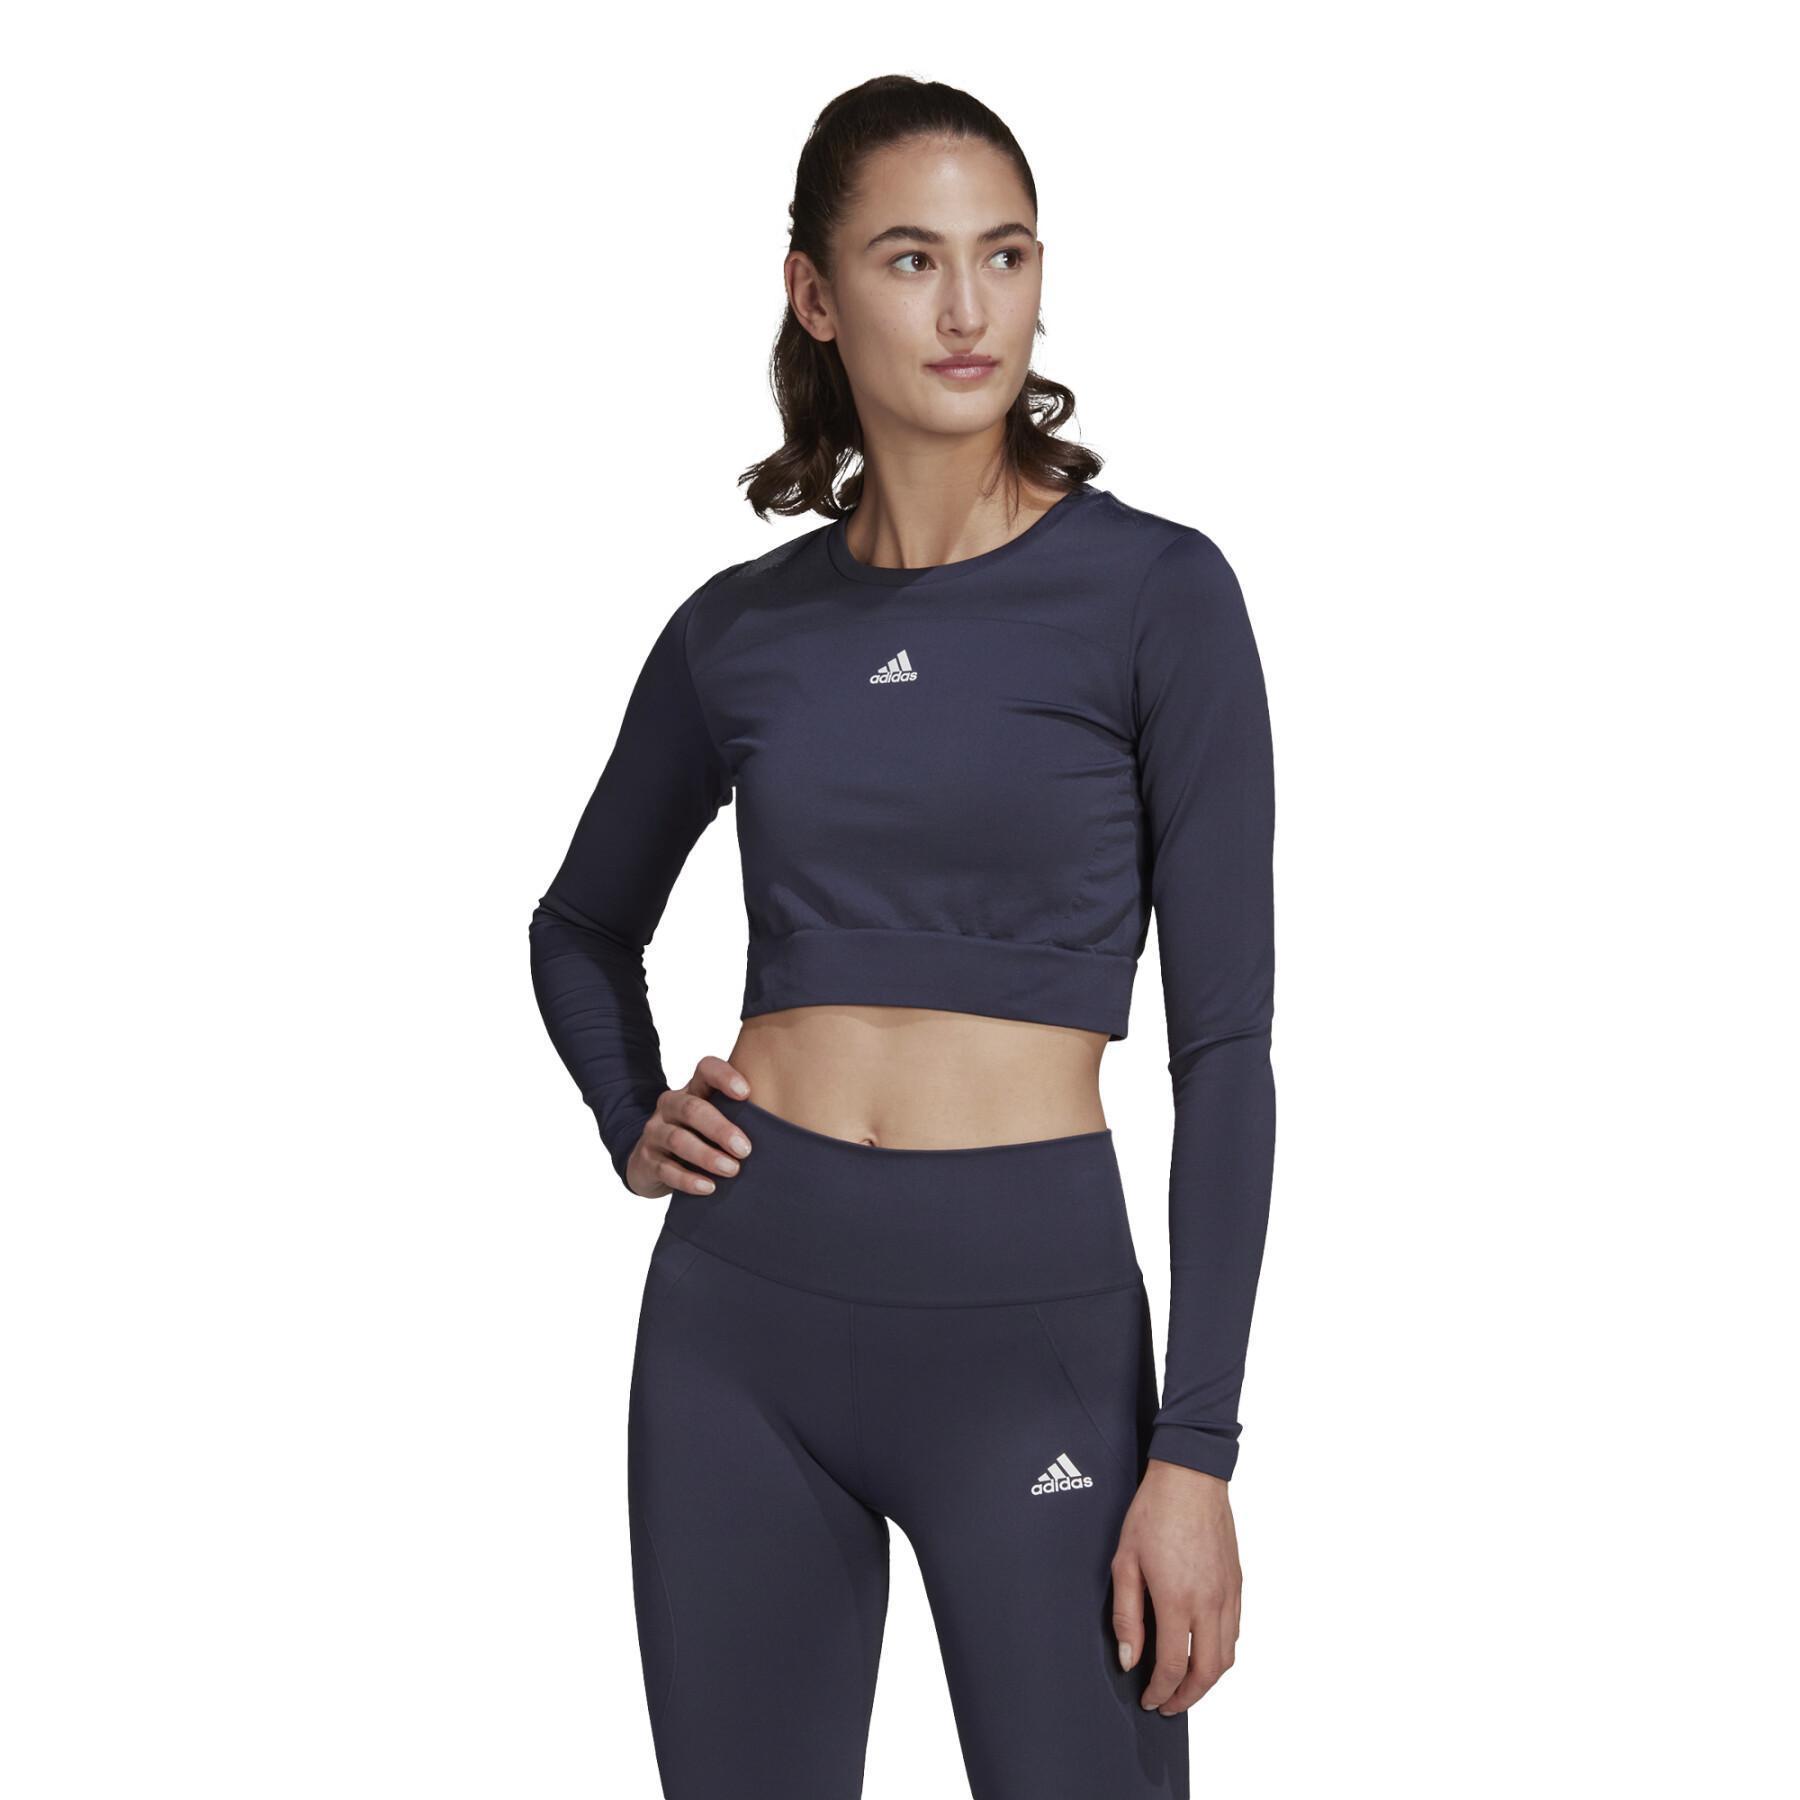 Camiseta de mujer adidas Aeroknit Seamless Fitted Cropped